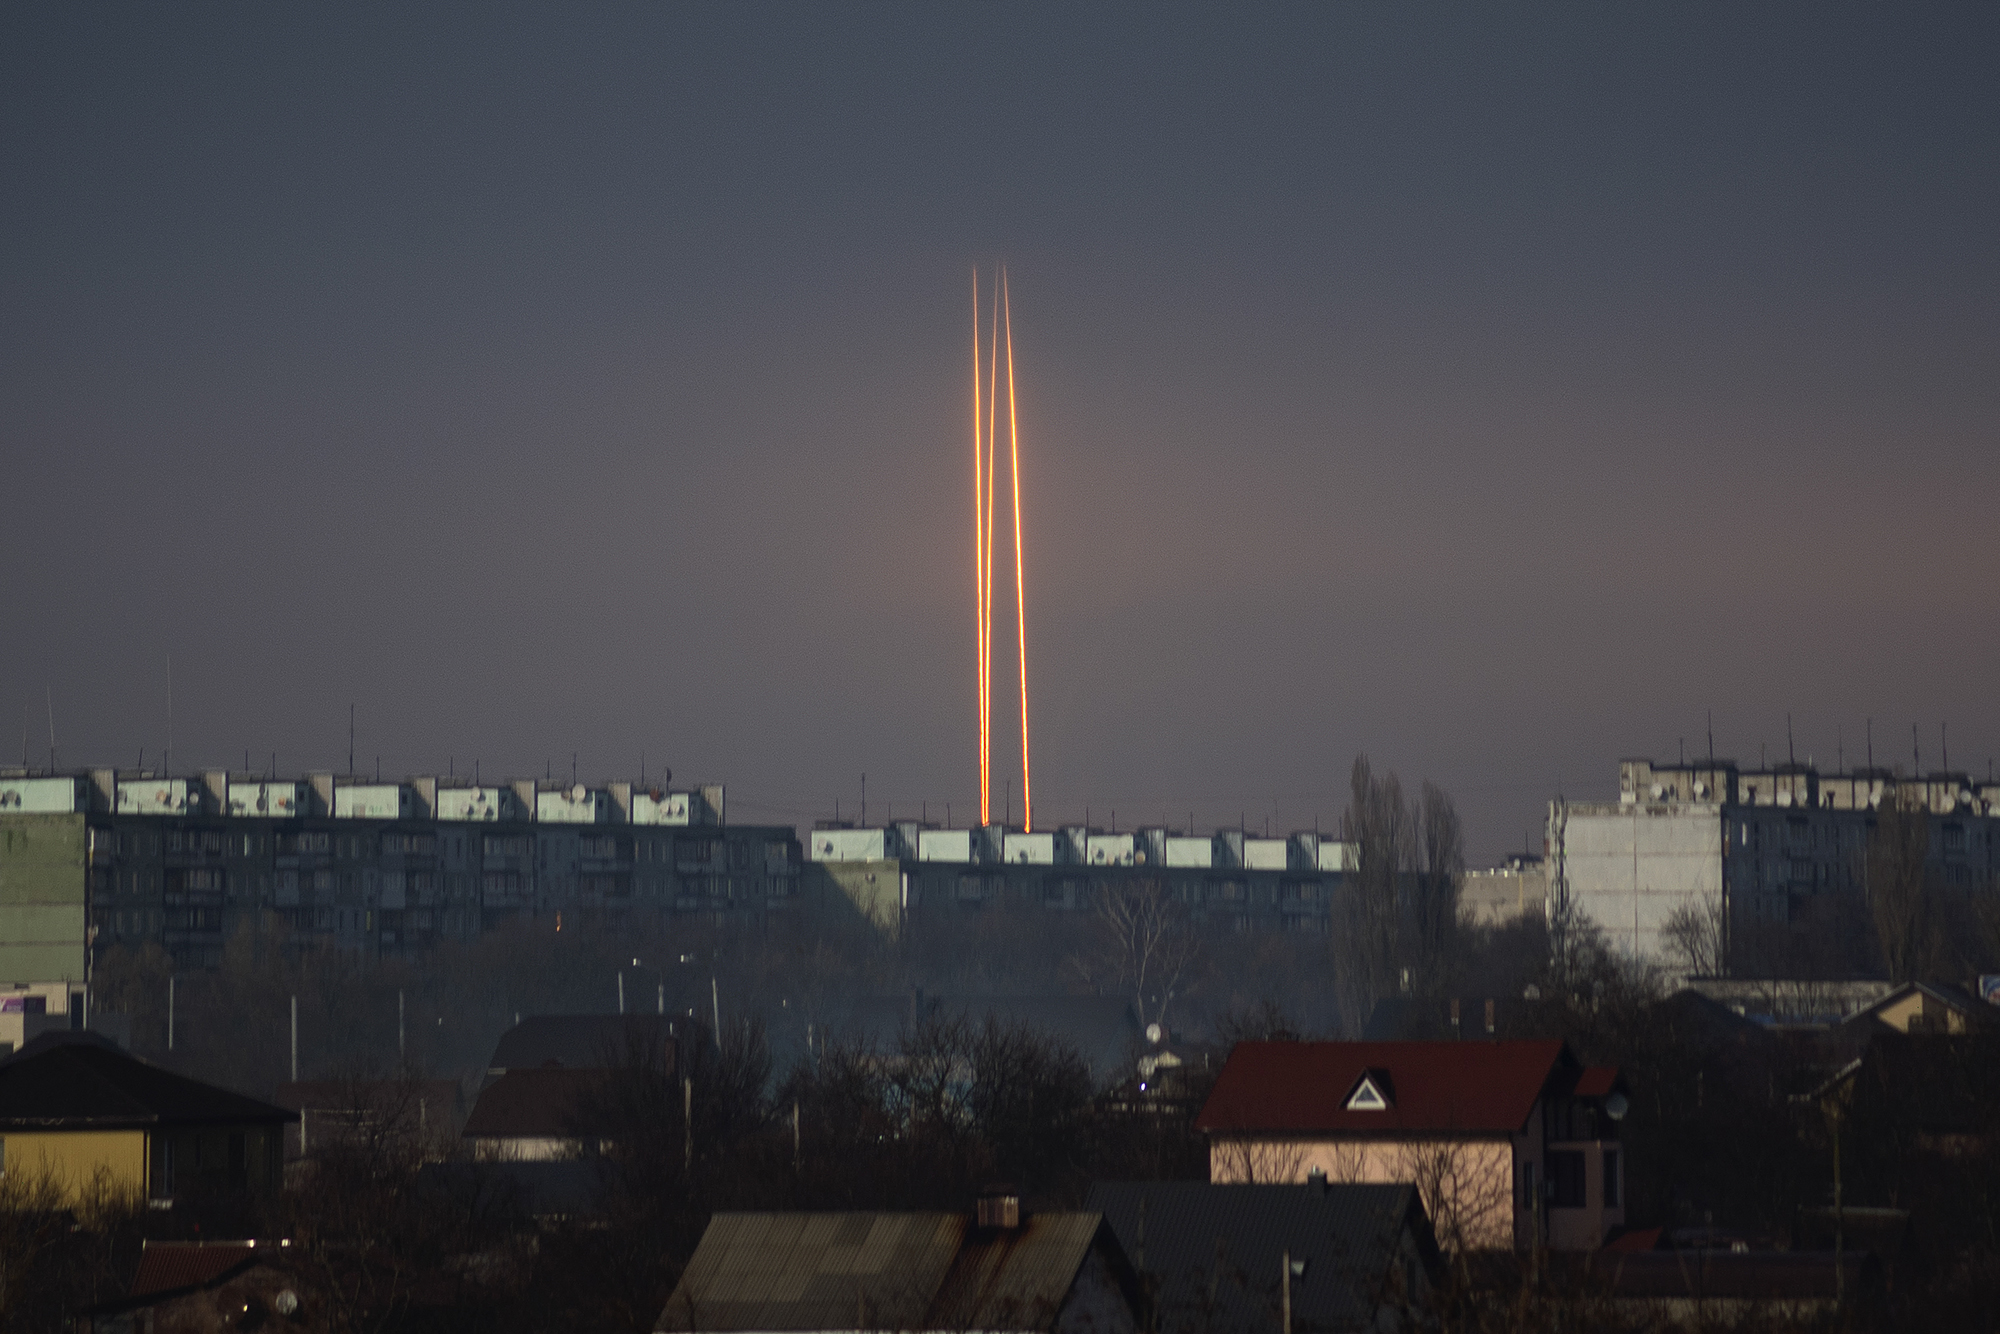 Three rockets launched against Ukraine from Russia's Belgorod region are seen at dawn in Kharkiv, Ukraine, on March 9.